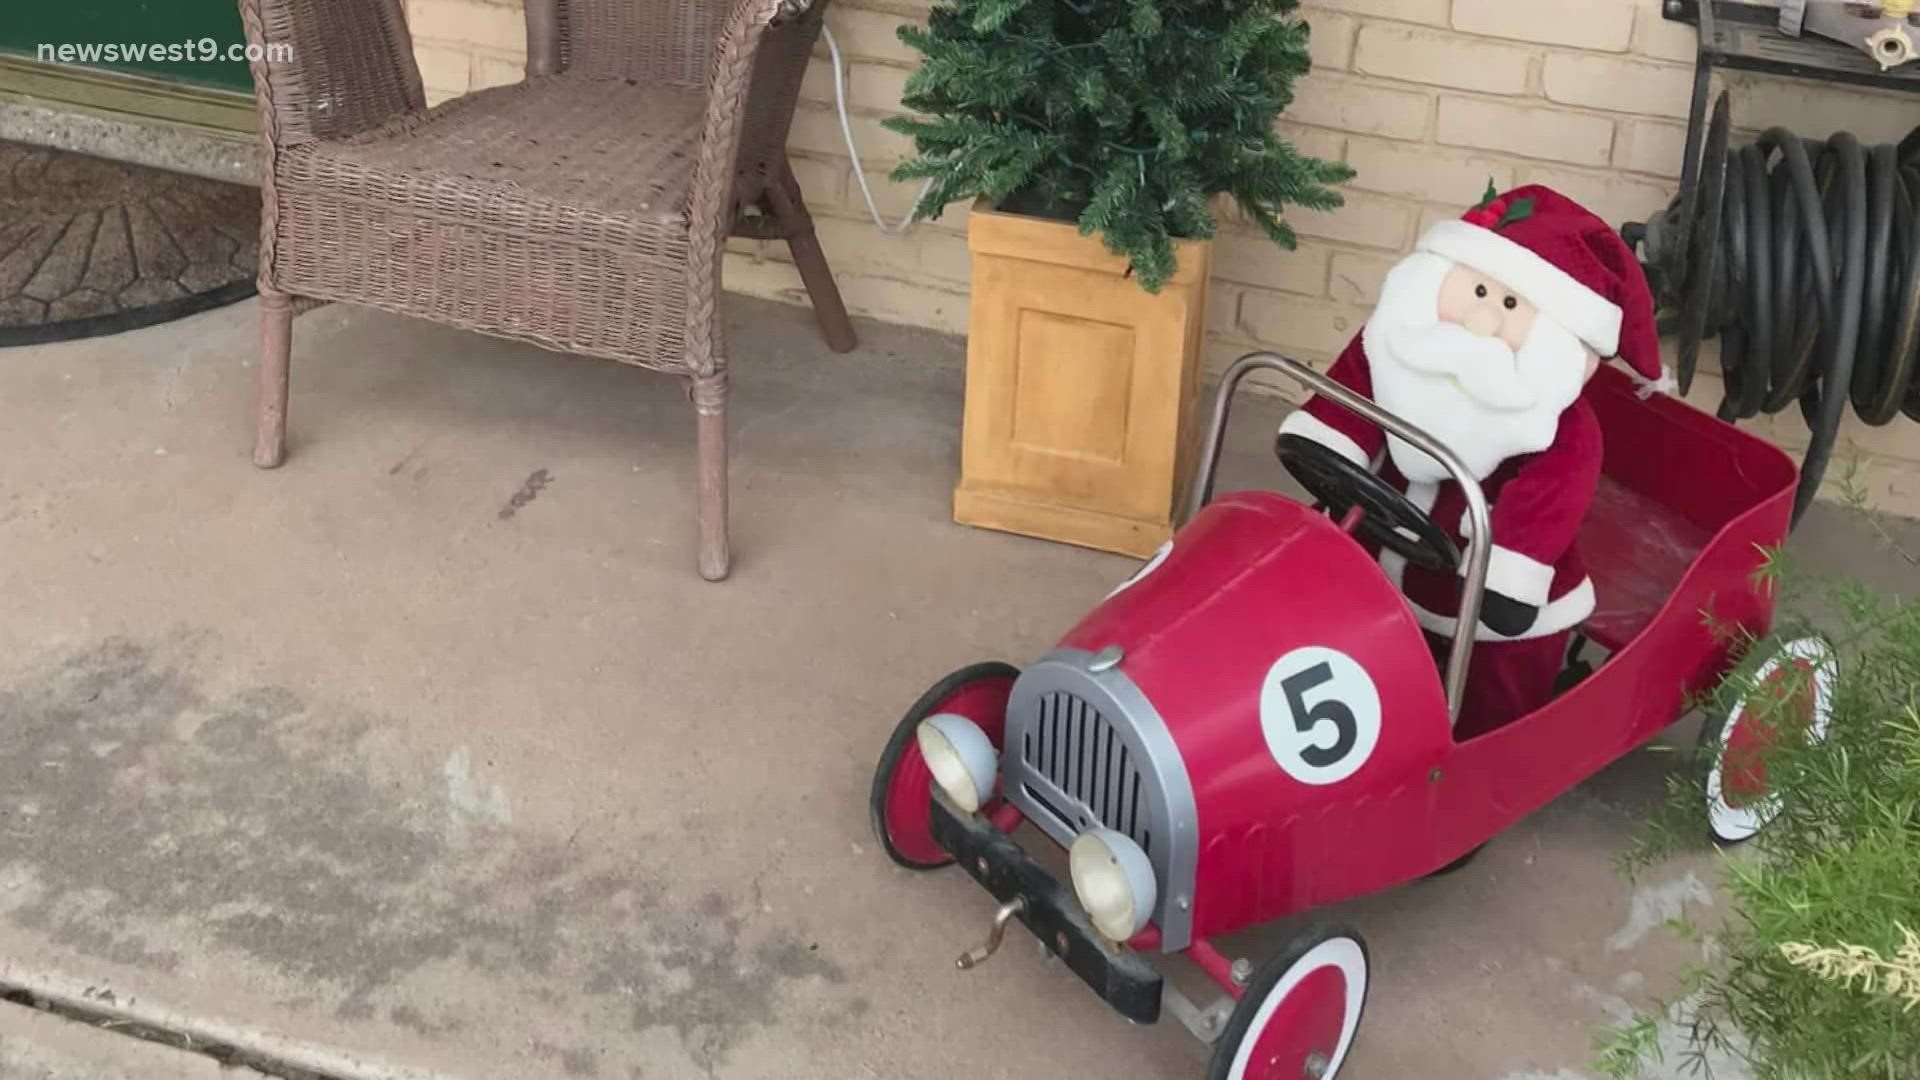 Linda Pryor caught her Santa being stolen off her front porch Thursday on her Ring cam. The Santa has been in the family for years and has now been found.